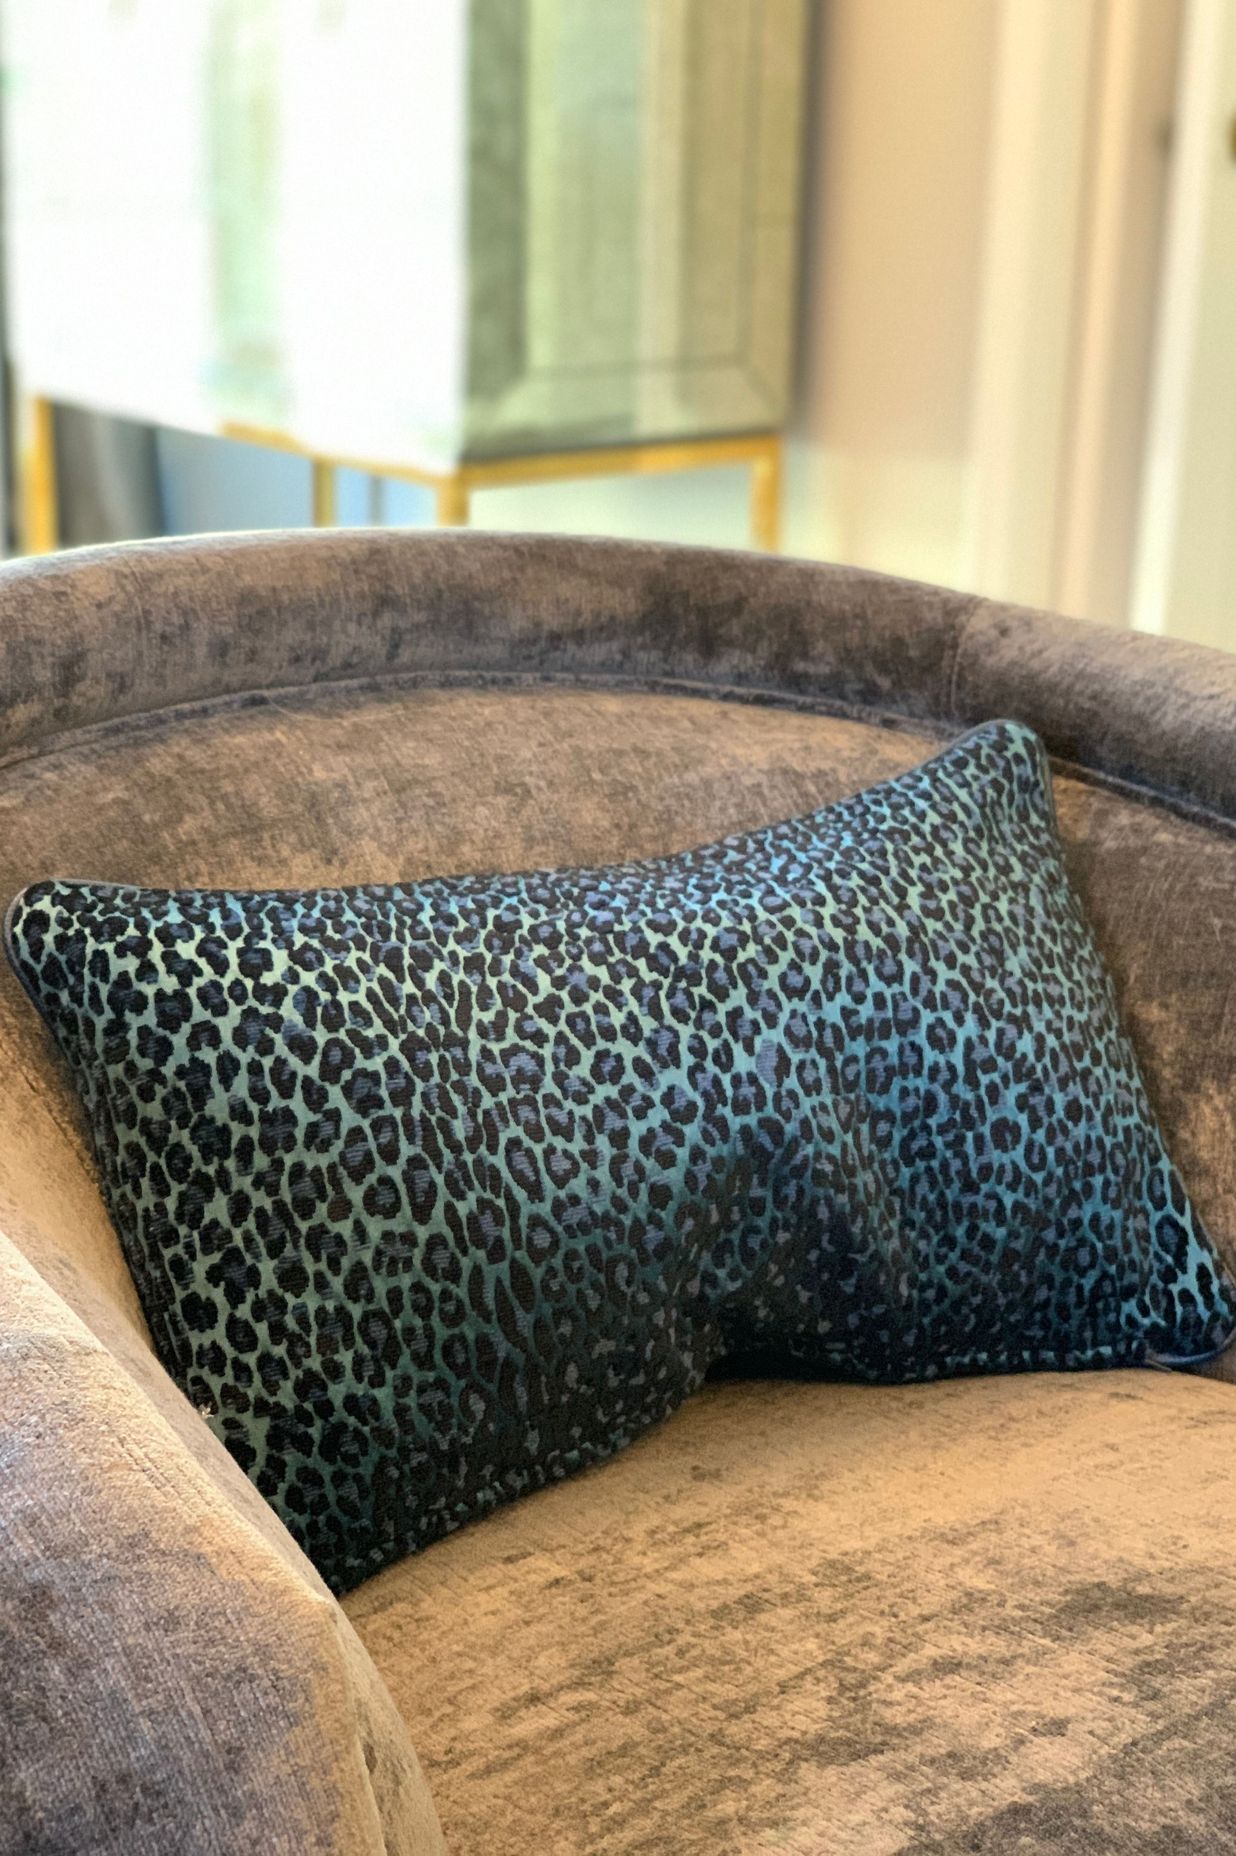 Leopard skin in shades of blue with leather trim